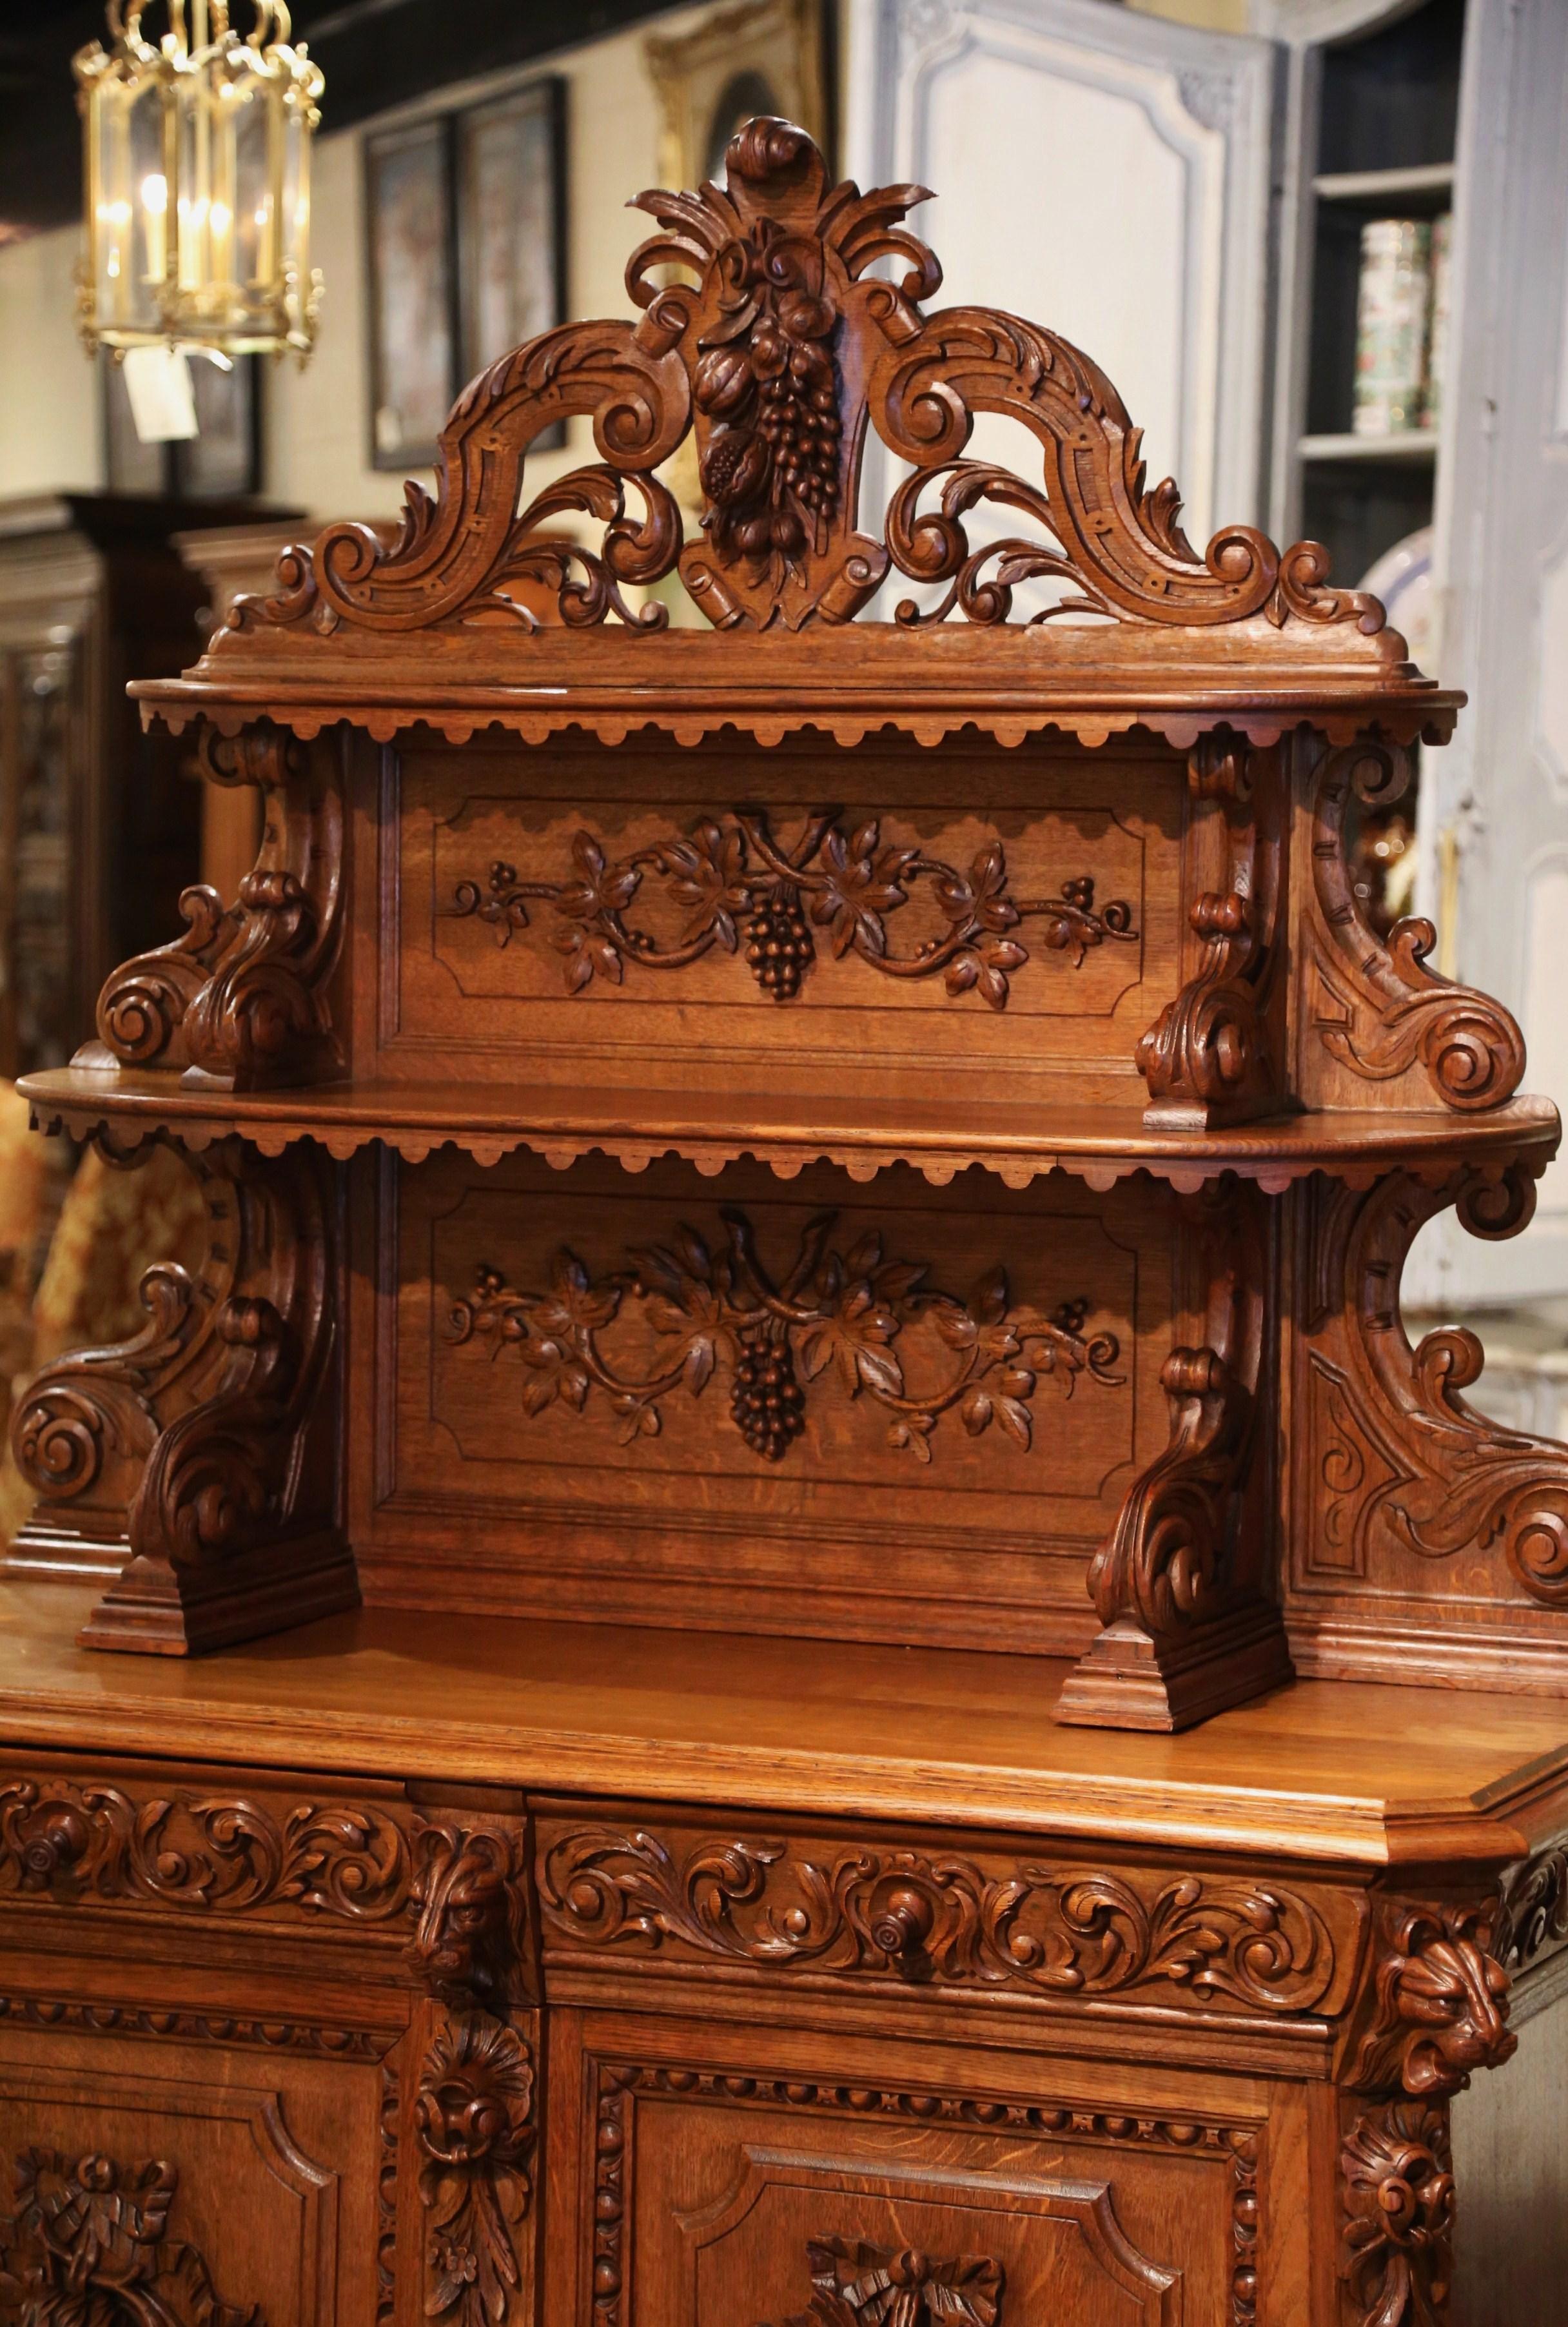 Black Forest 19th Century French Carved Oak Hunt Buffet Server with Grape and Vine Motifs